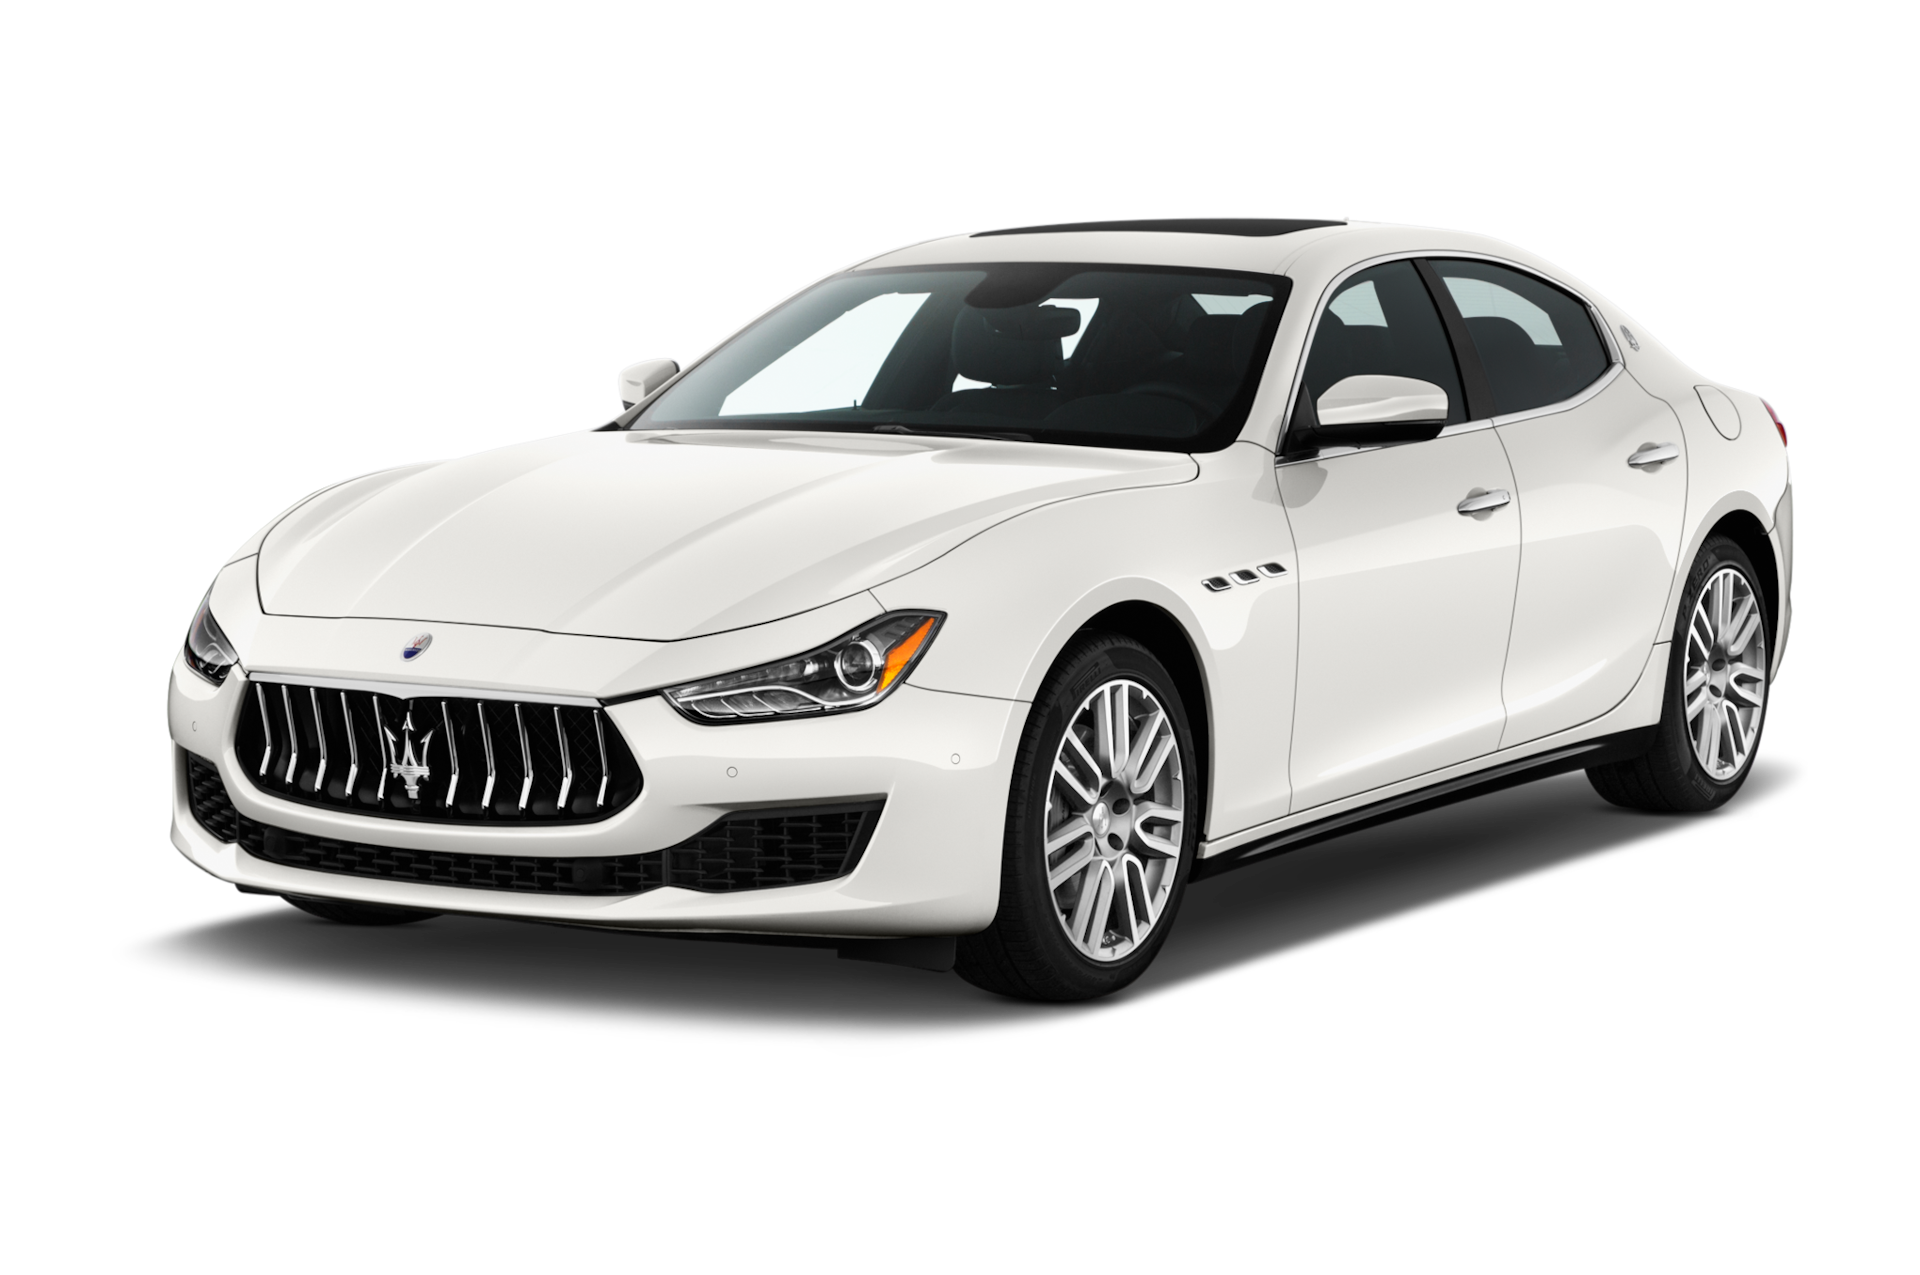 2020 Maserati Ghibli Prices, Reviews, and Photos - MotorTrend